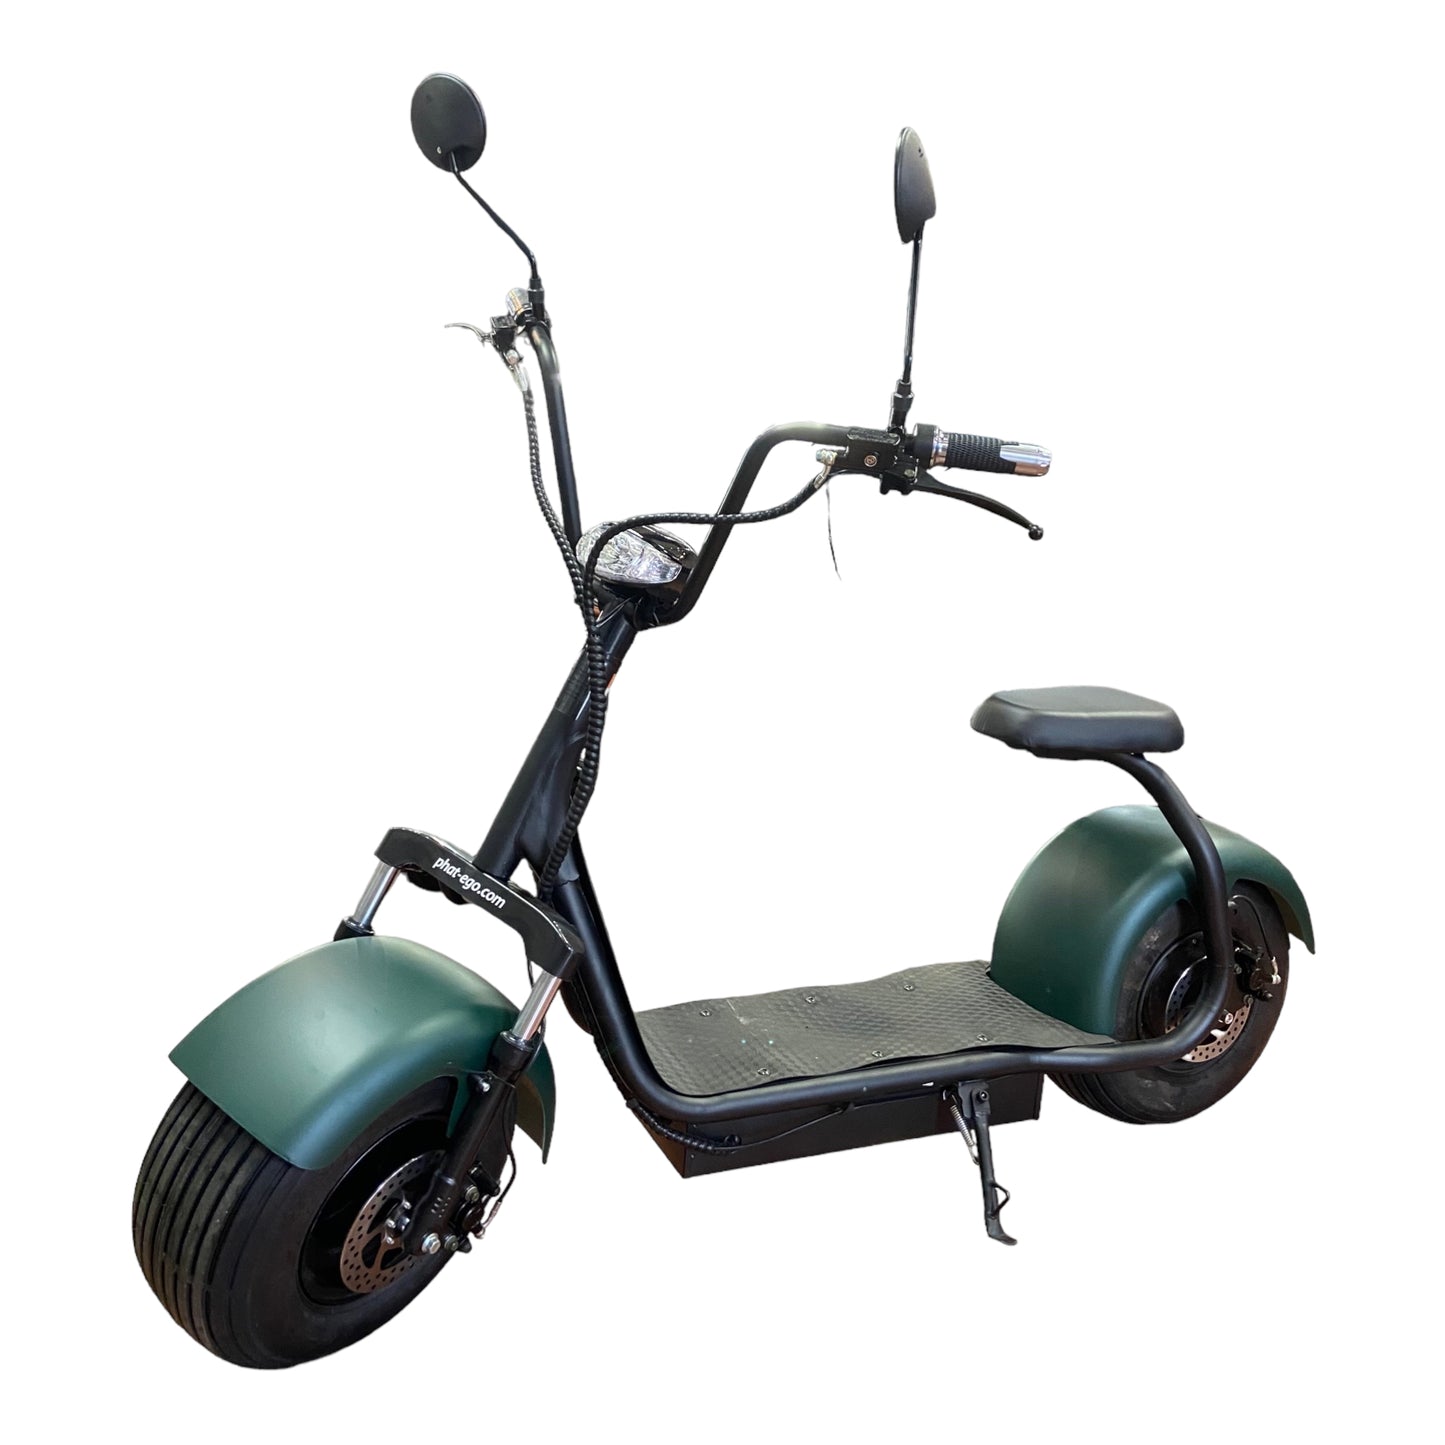 PHAT EGO SPORT 2 ELECTRIC SCOOTER